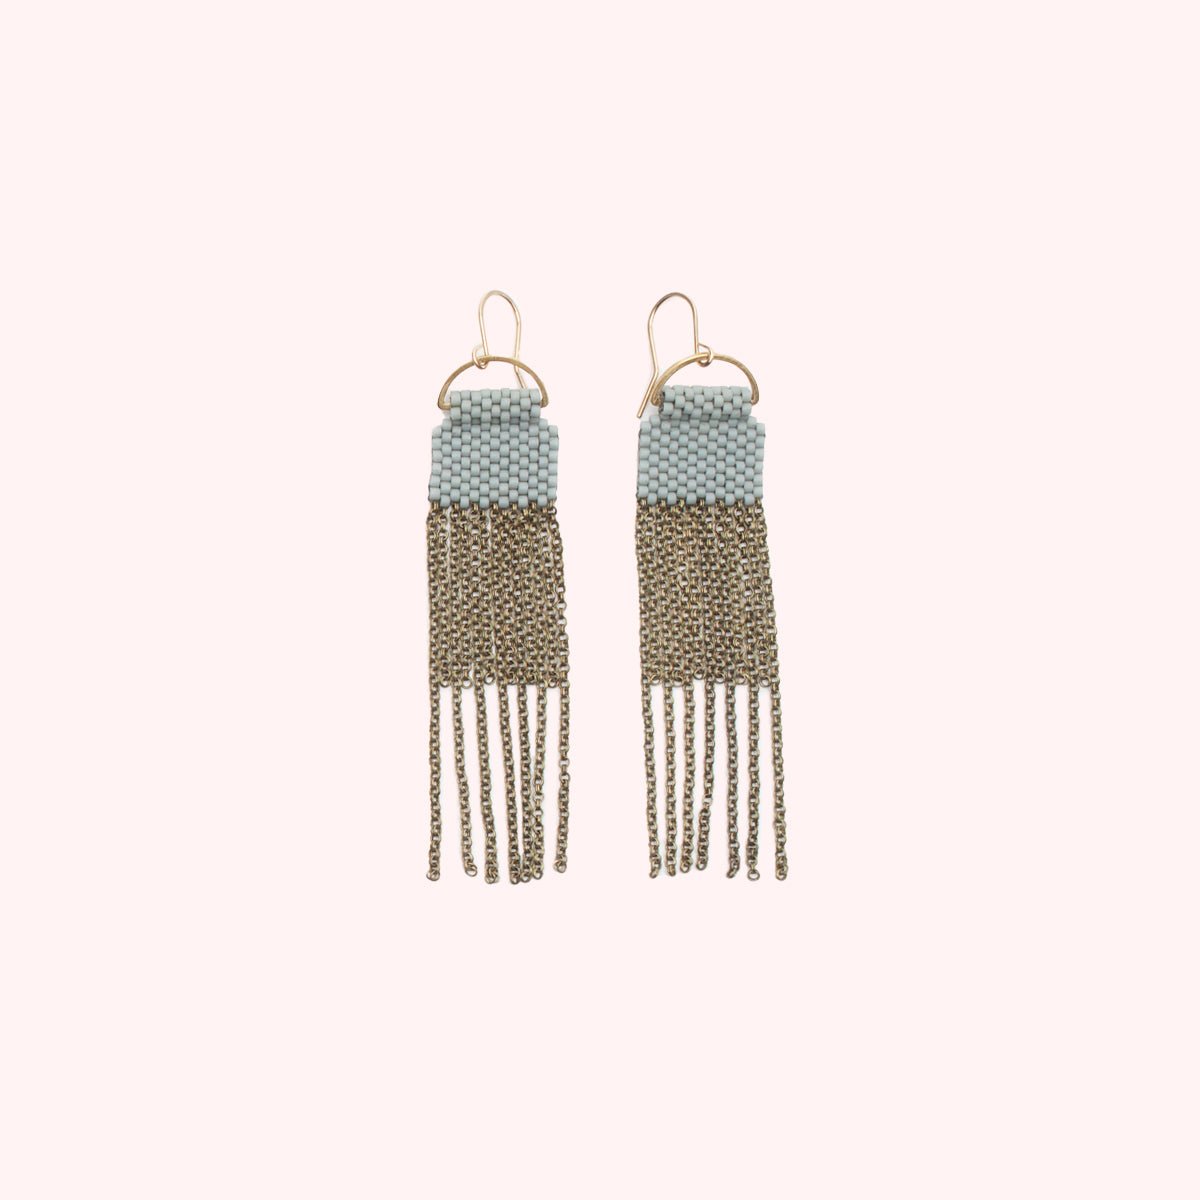 A pair of blue/grey beaded earrings with long strands of antique brass chain secured around a small brass hoop. The Curtain Earrings in Blue Grey are designed and handcrafted by A Nod to Design in Portland, OR.